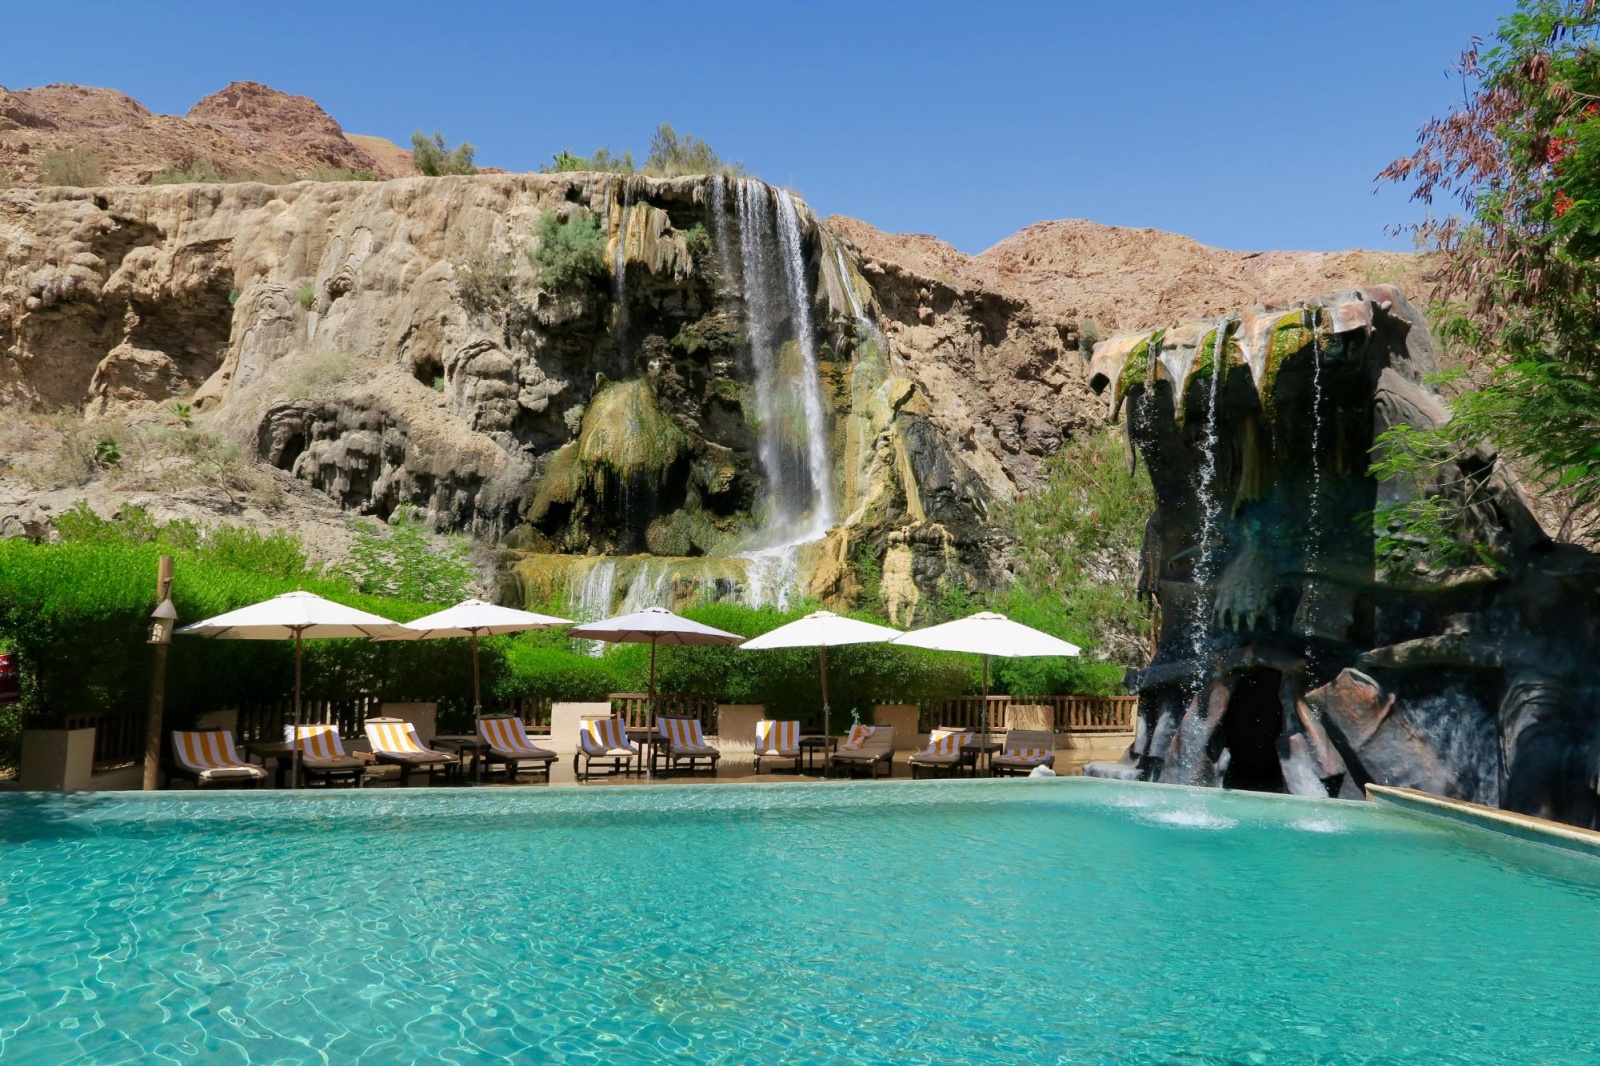 Main Hot Springs Resort And Spa Hotel In The Desert With A Waterfall